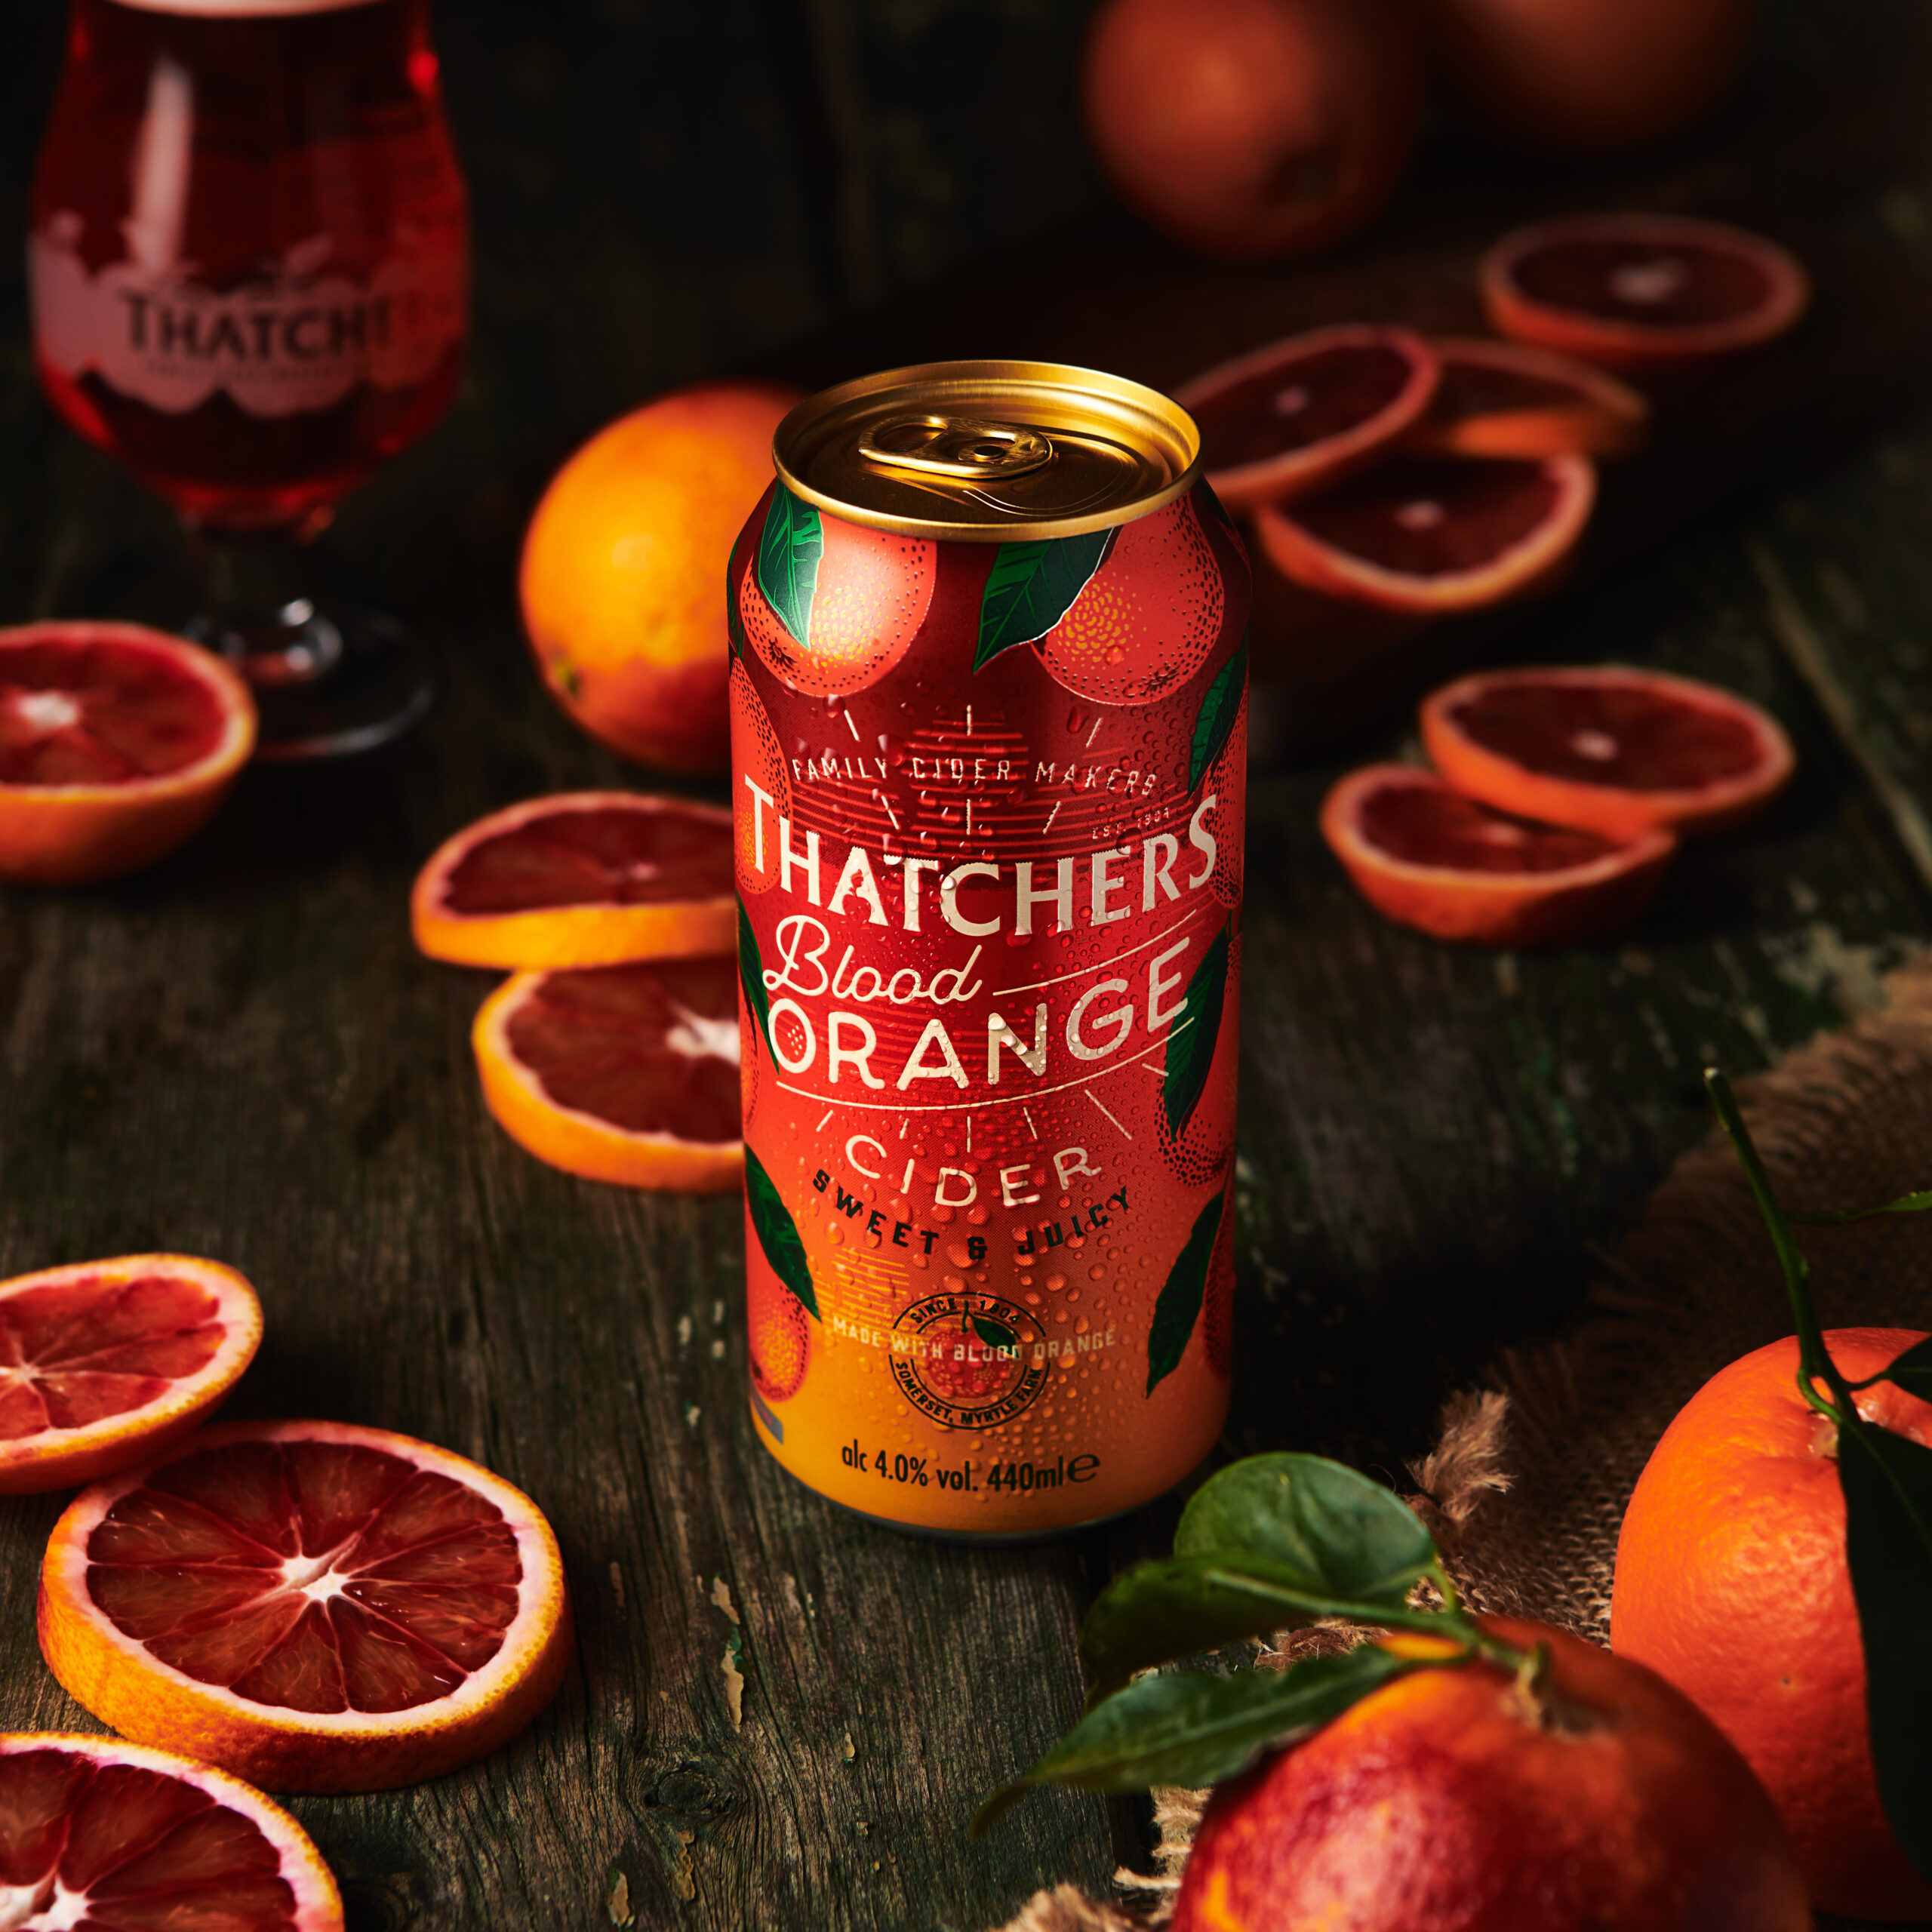 THATCHERS BLOOD ORANGE IS THE MOST SUCCESSFUL BWS INNOVATION OF THE YEAR!